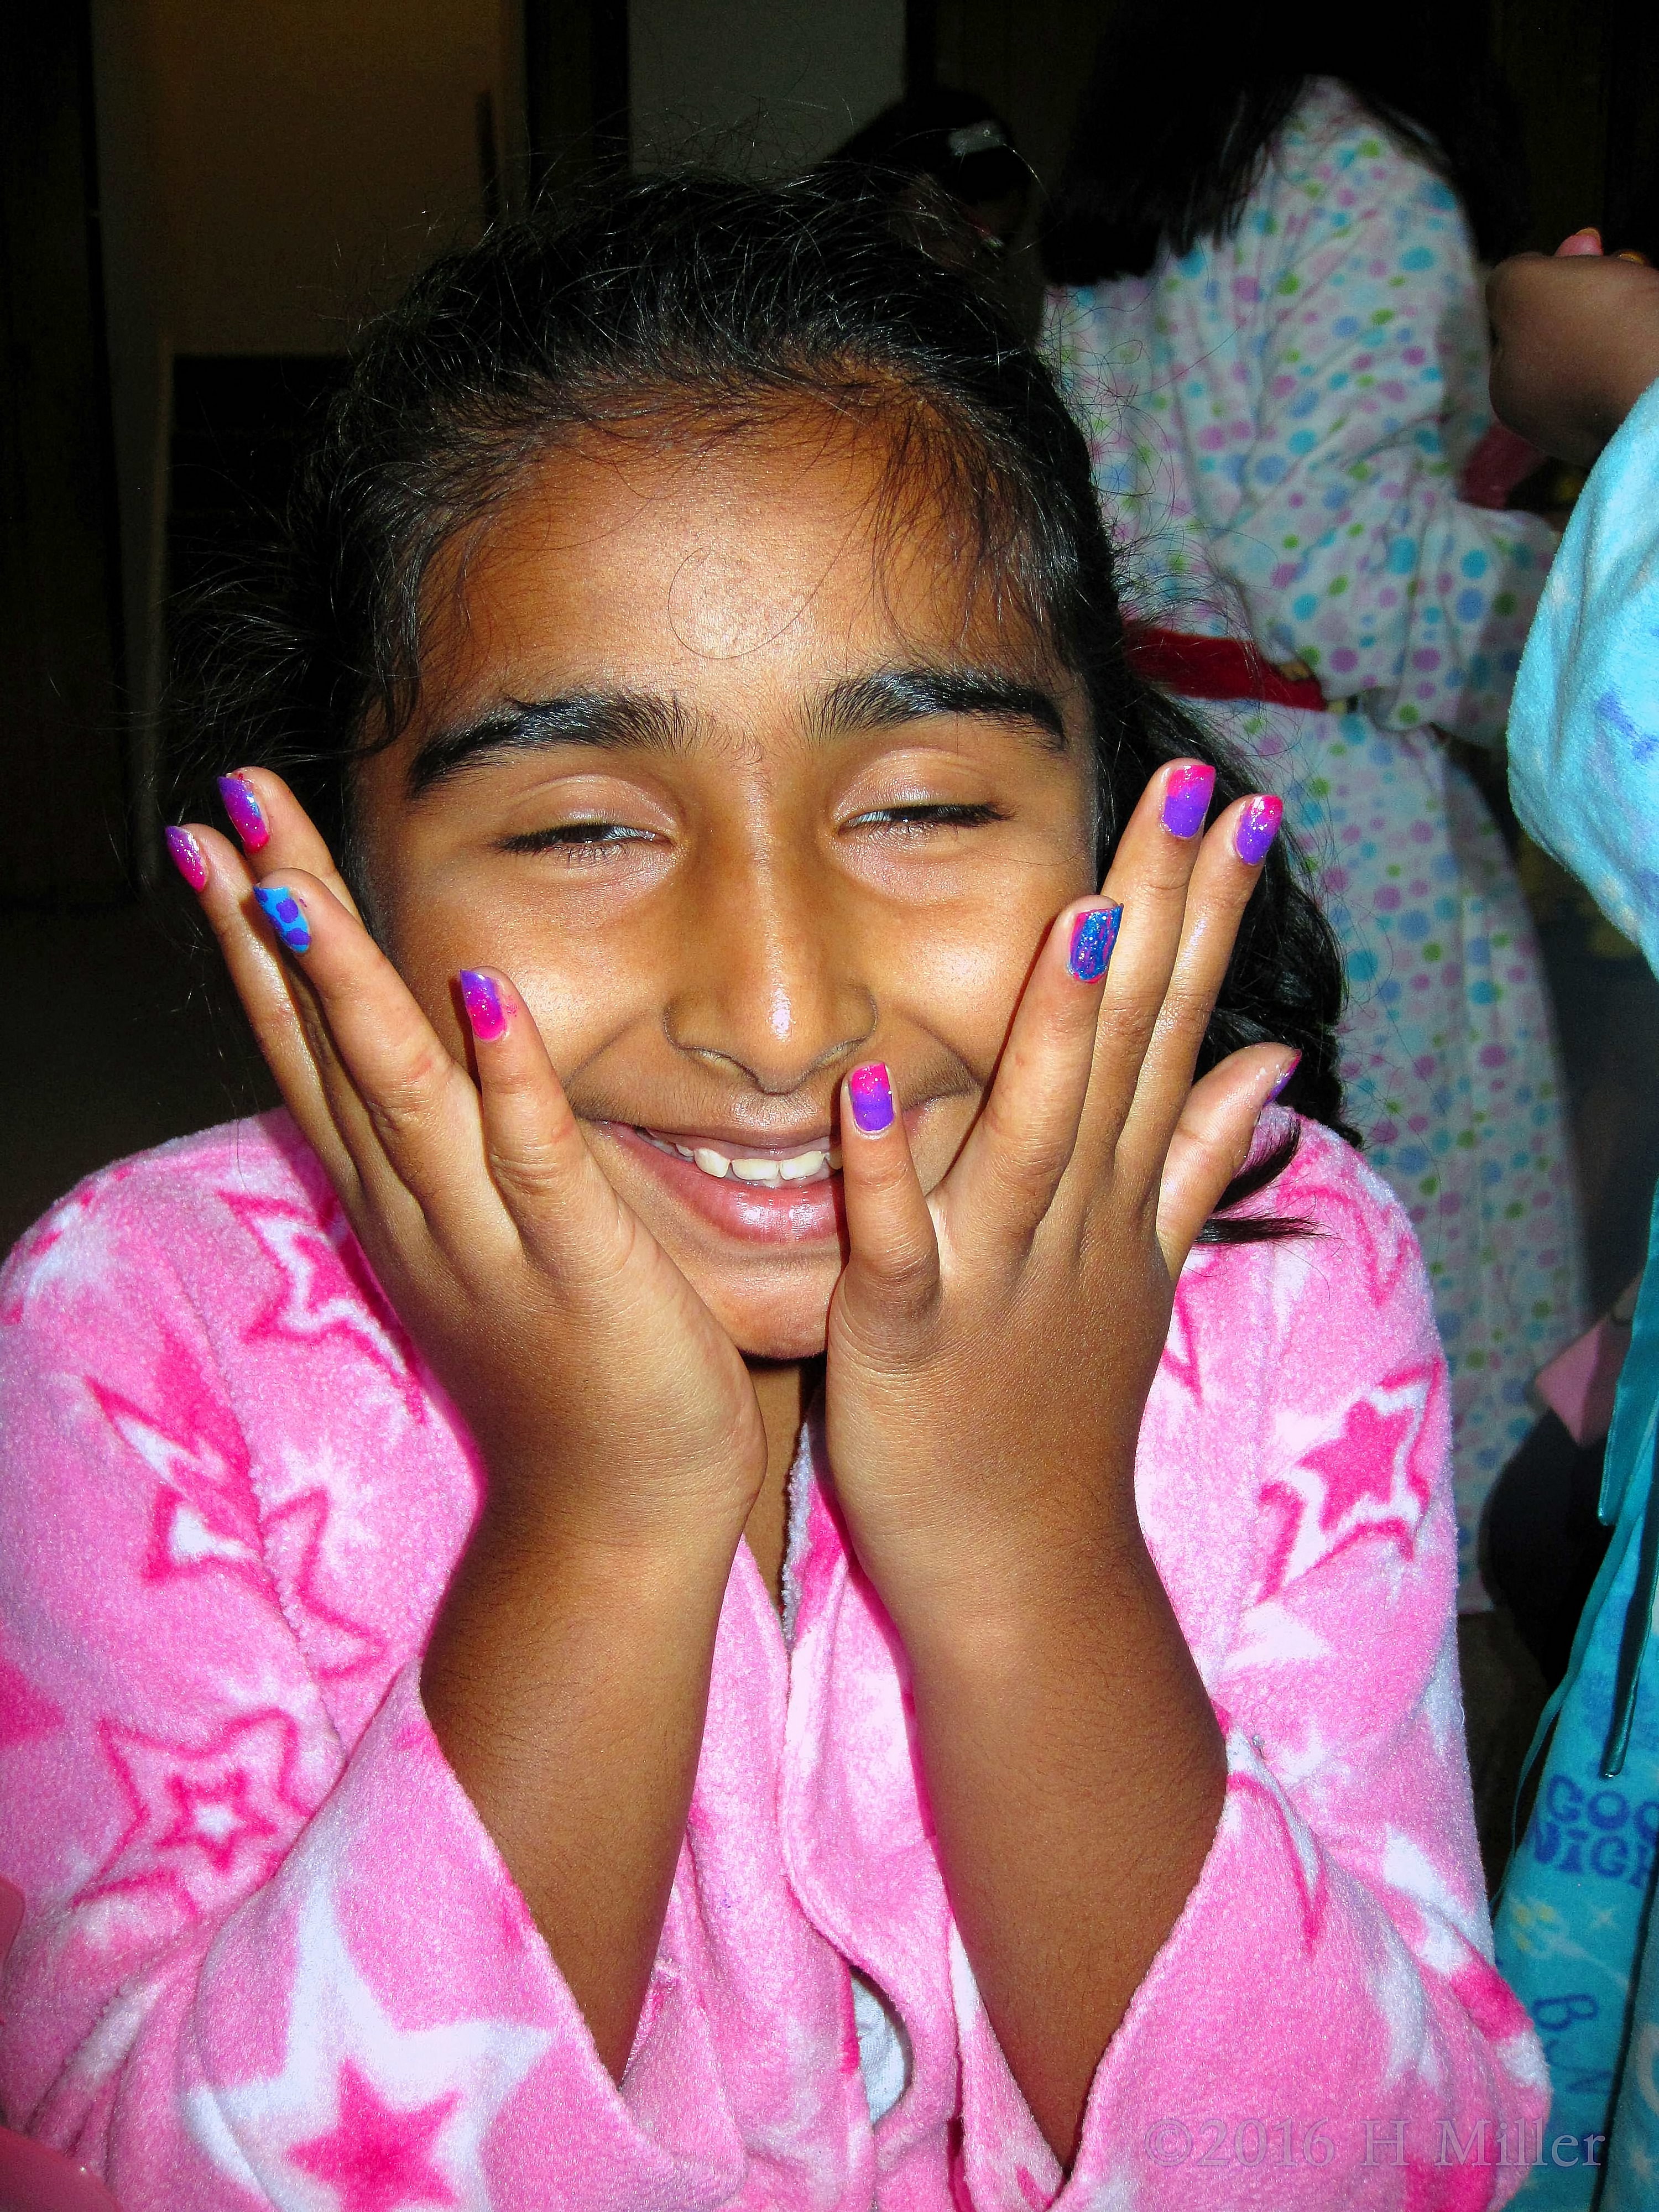 She Is Soo Happy With Her Awesome Girls Manicure!